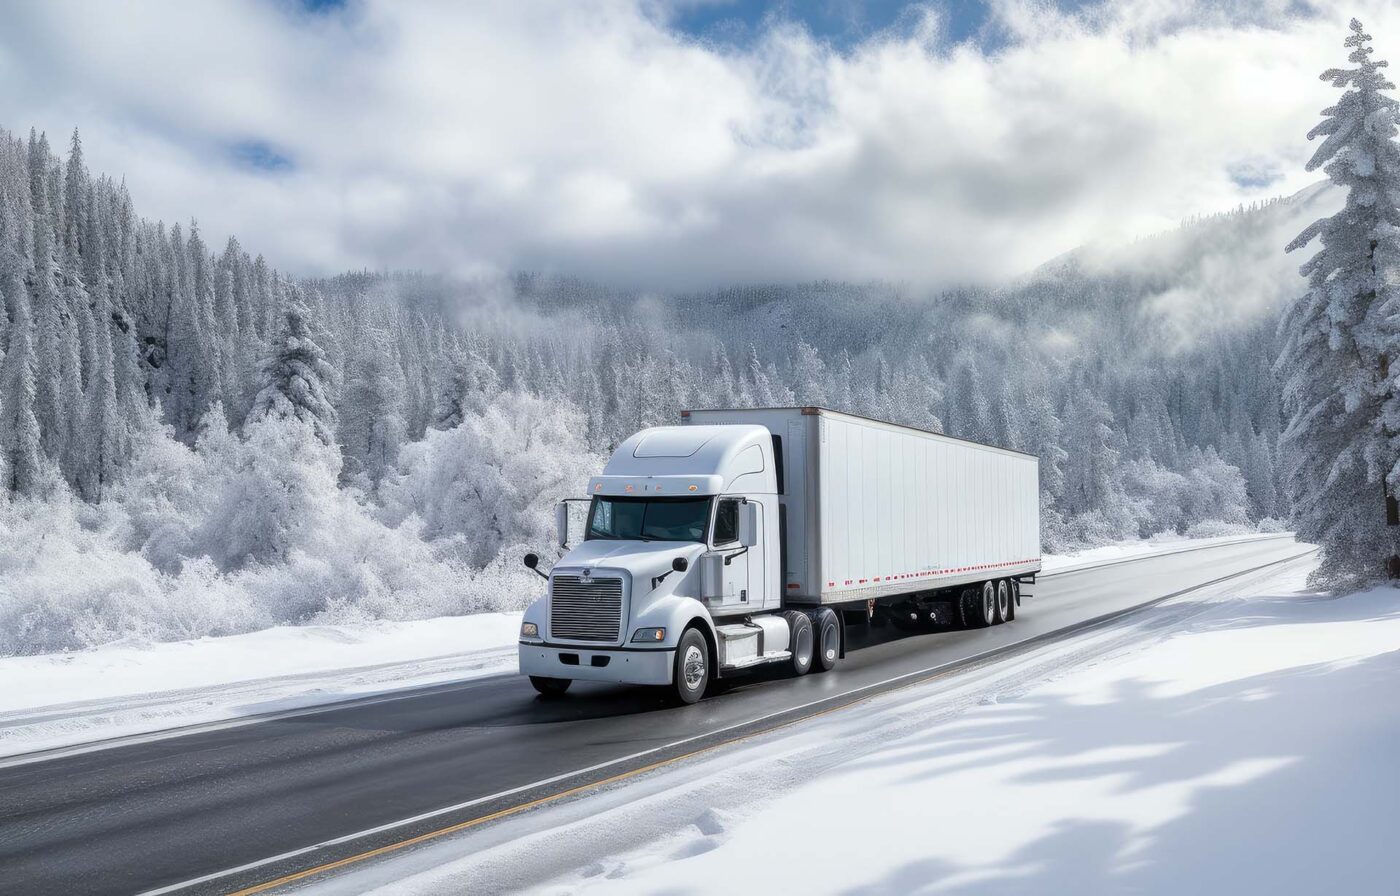 A large truck transports cargo during a winter storm. Thissymbolizes the strength and determination of the transportation industry in challenging weather conditions